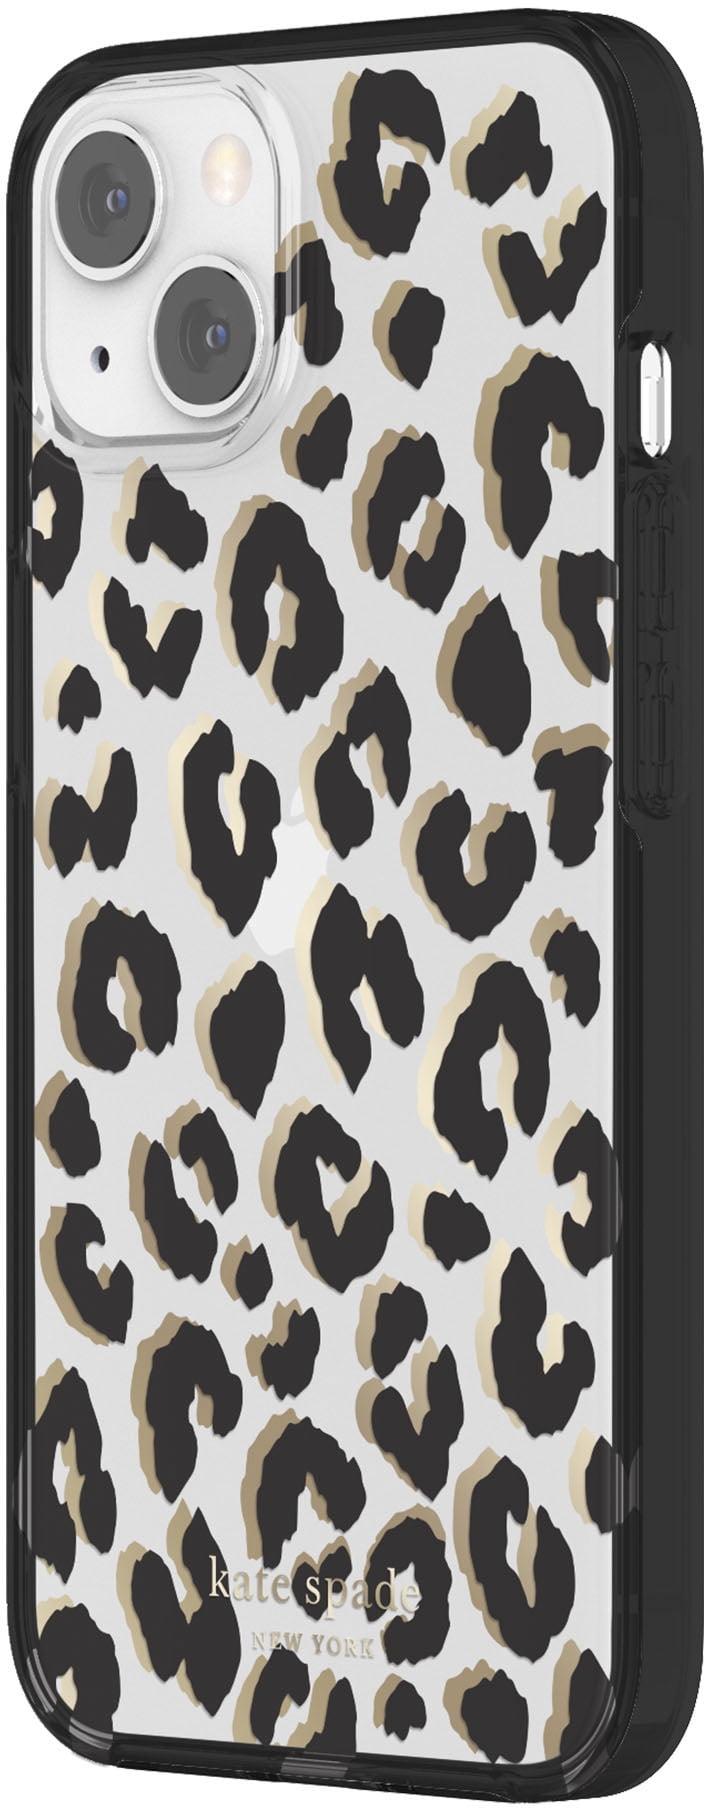 kate spade new york - Protective Hardshell Case for iPhone 13 - Leopard -  